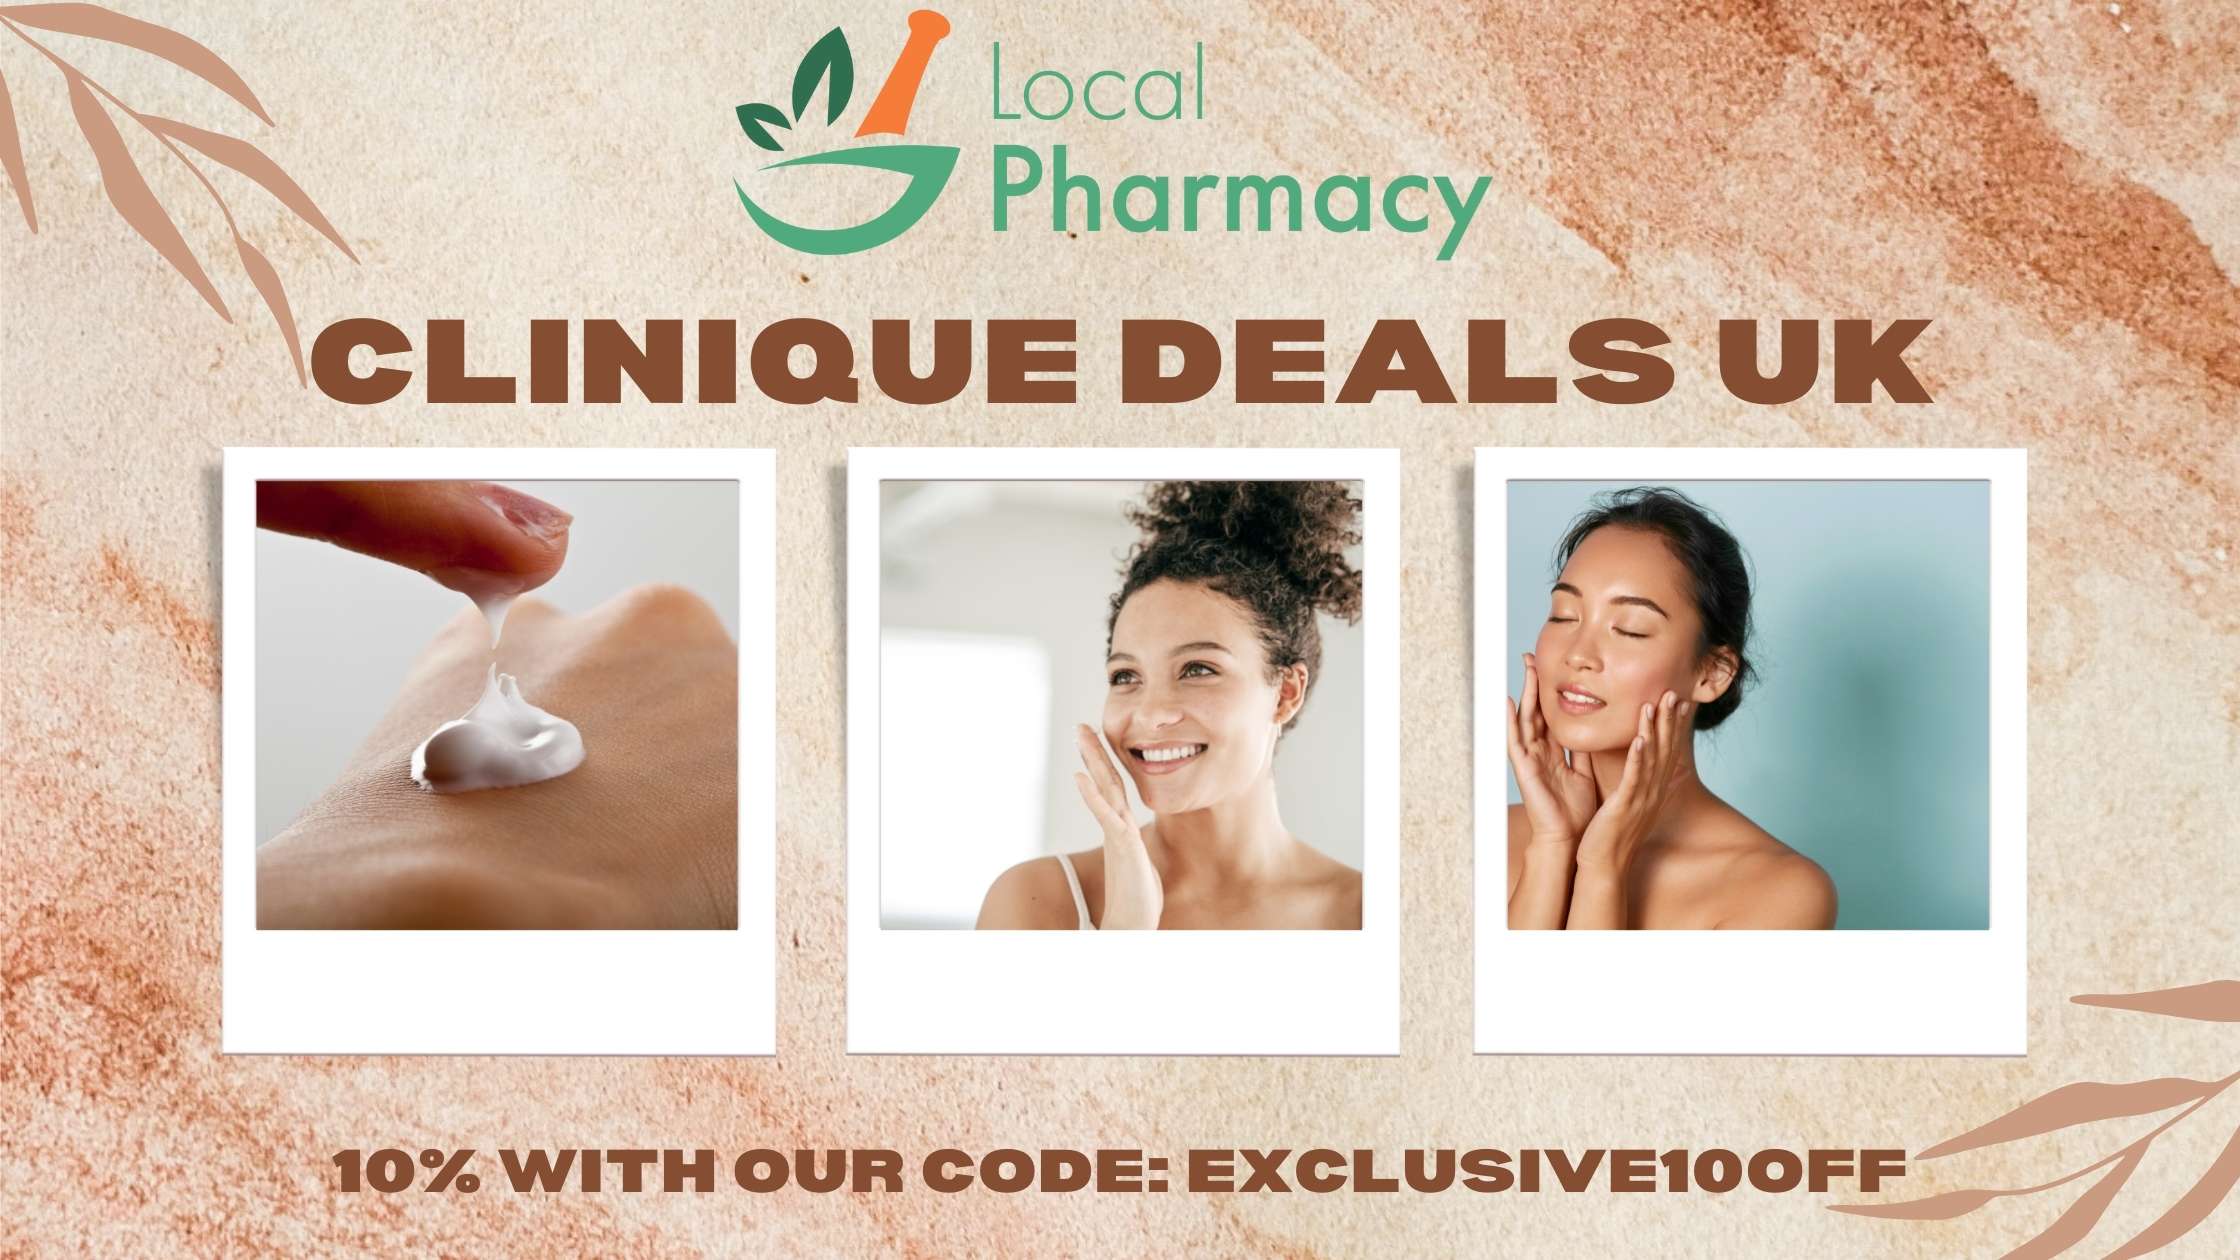 Clinique coupon code and deals uk